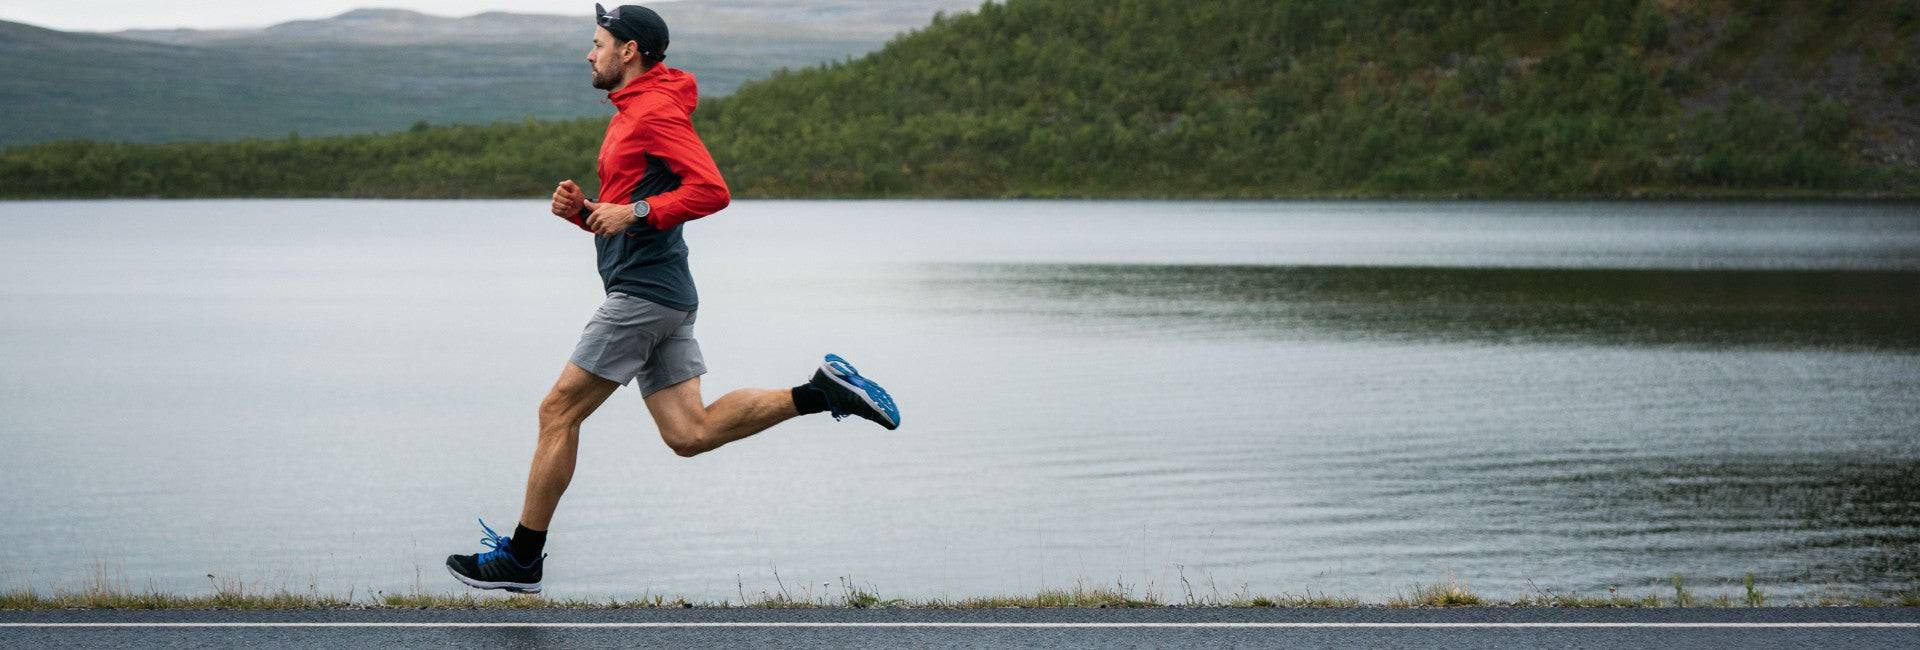 How To Start Running For Beginners: 7 Essentials For Getting Started